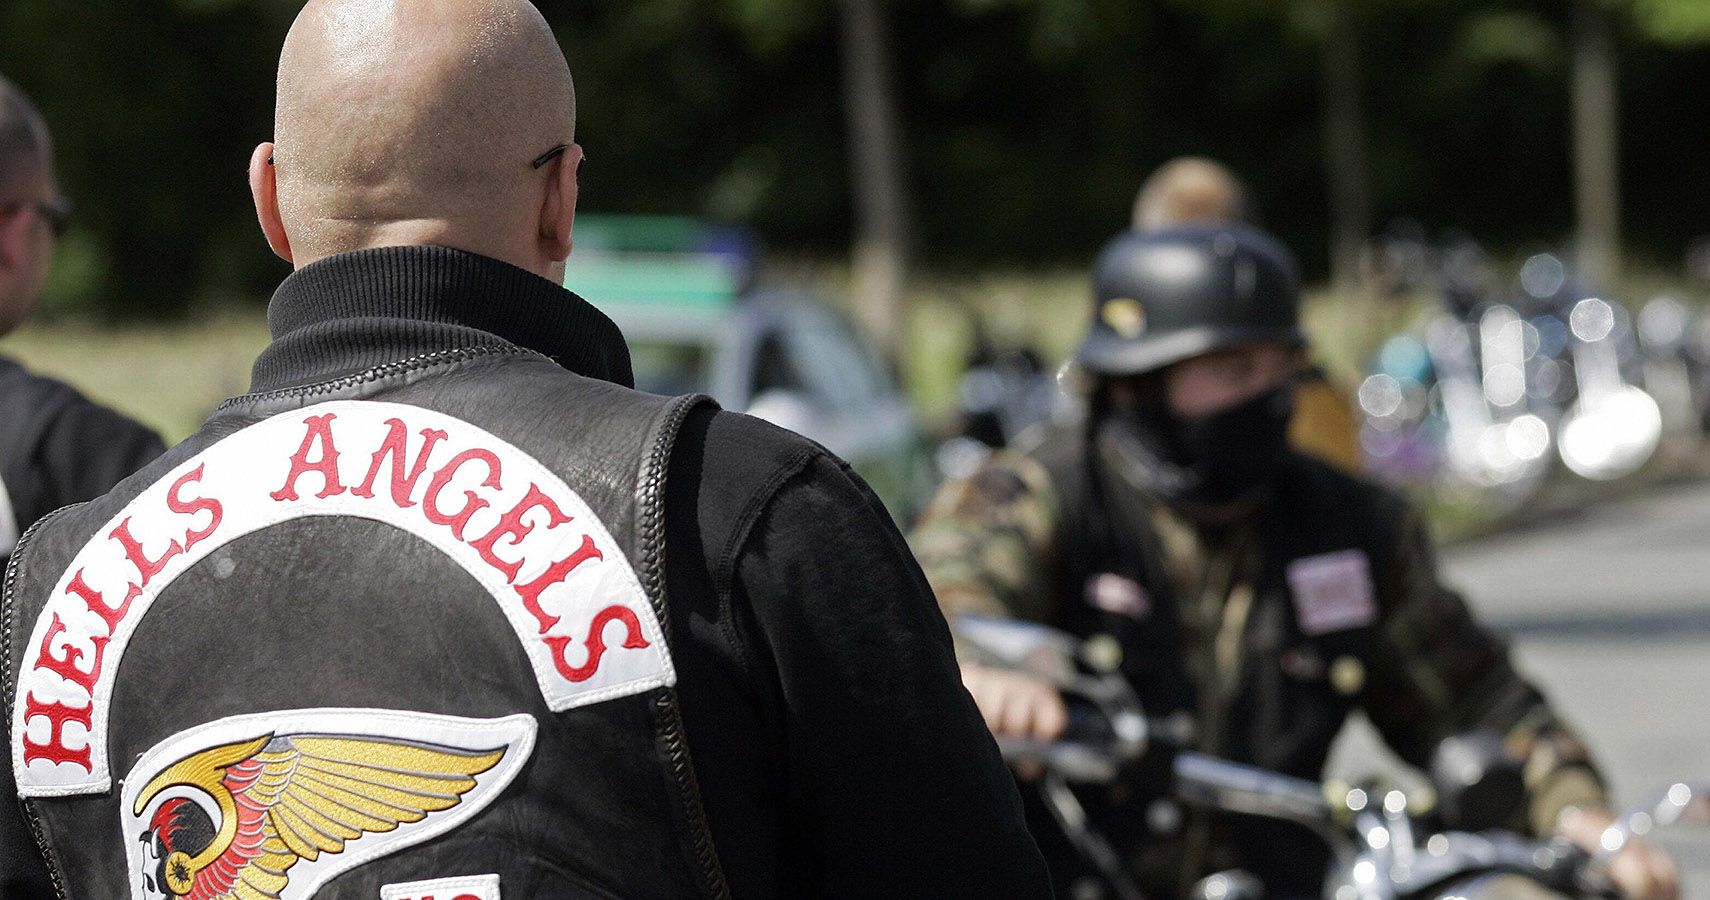 The Mongols MC Are The Hispanic Equivalent Of The Hells Angels